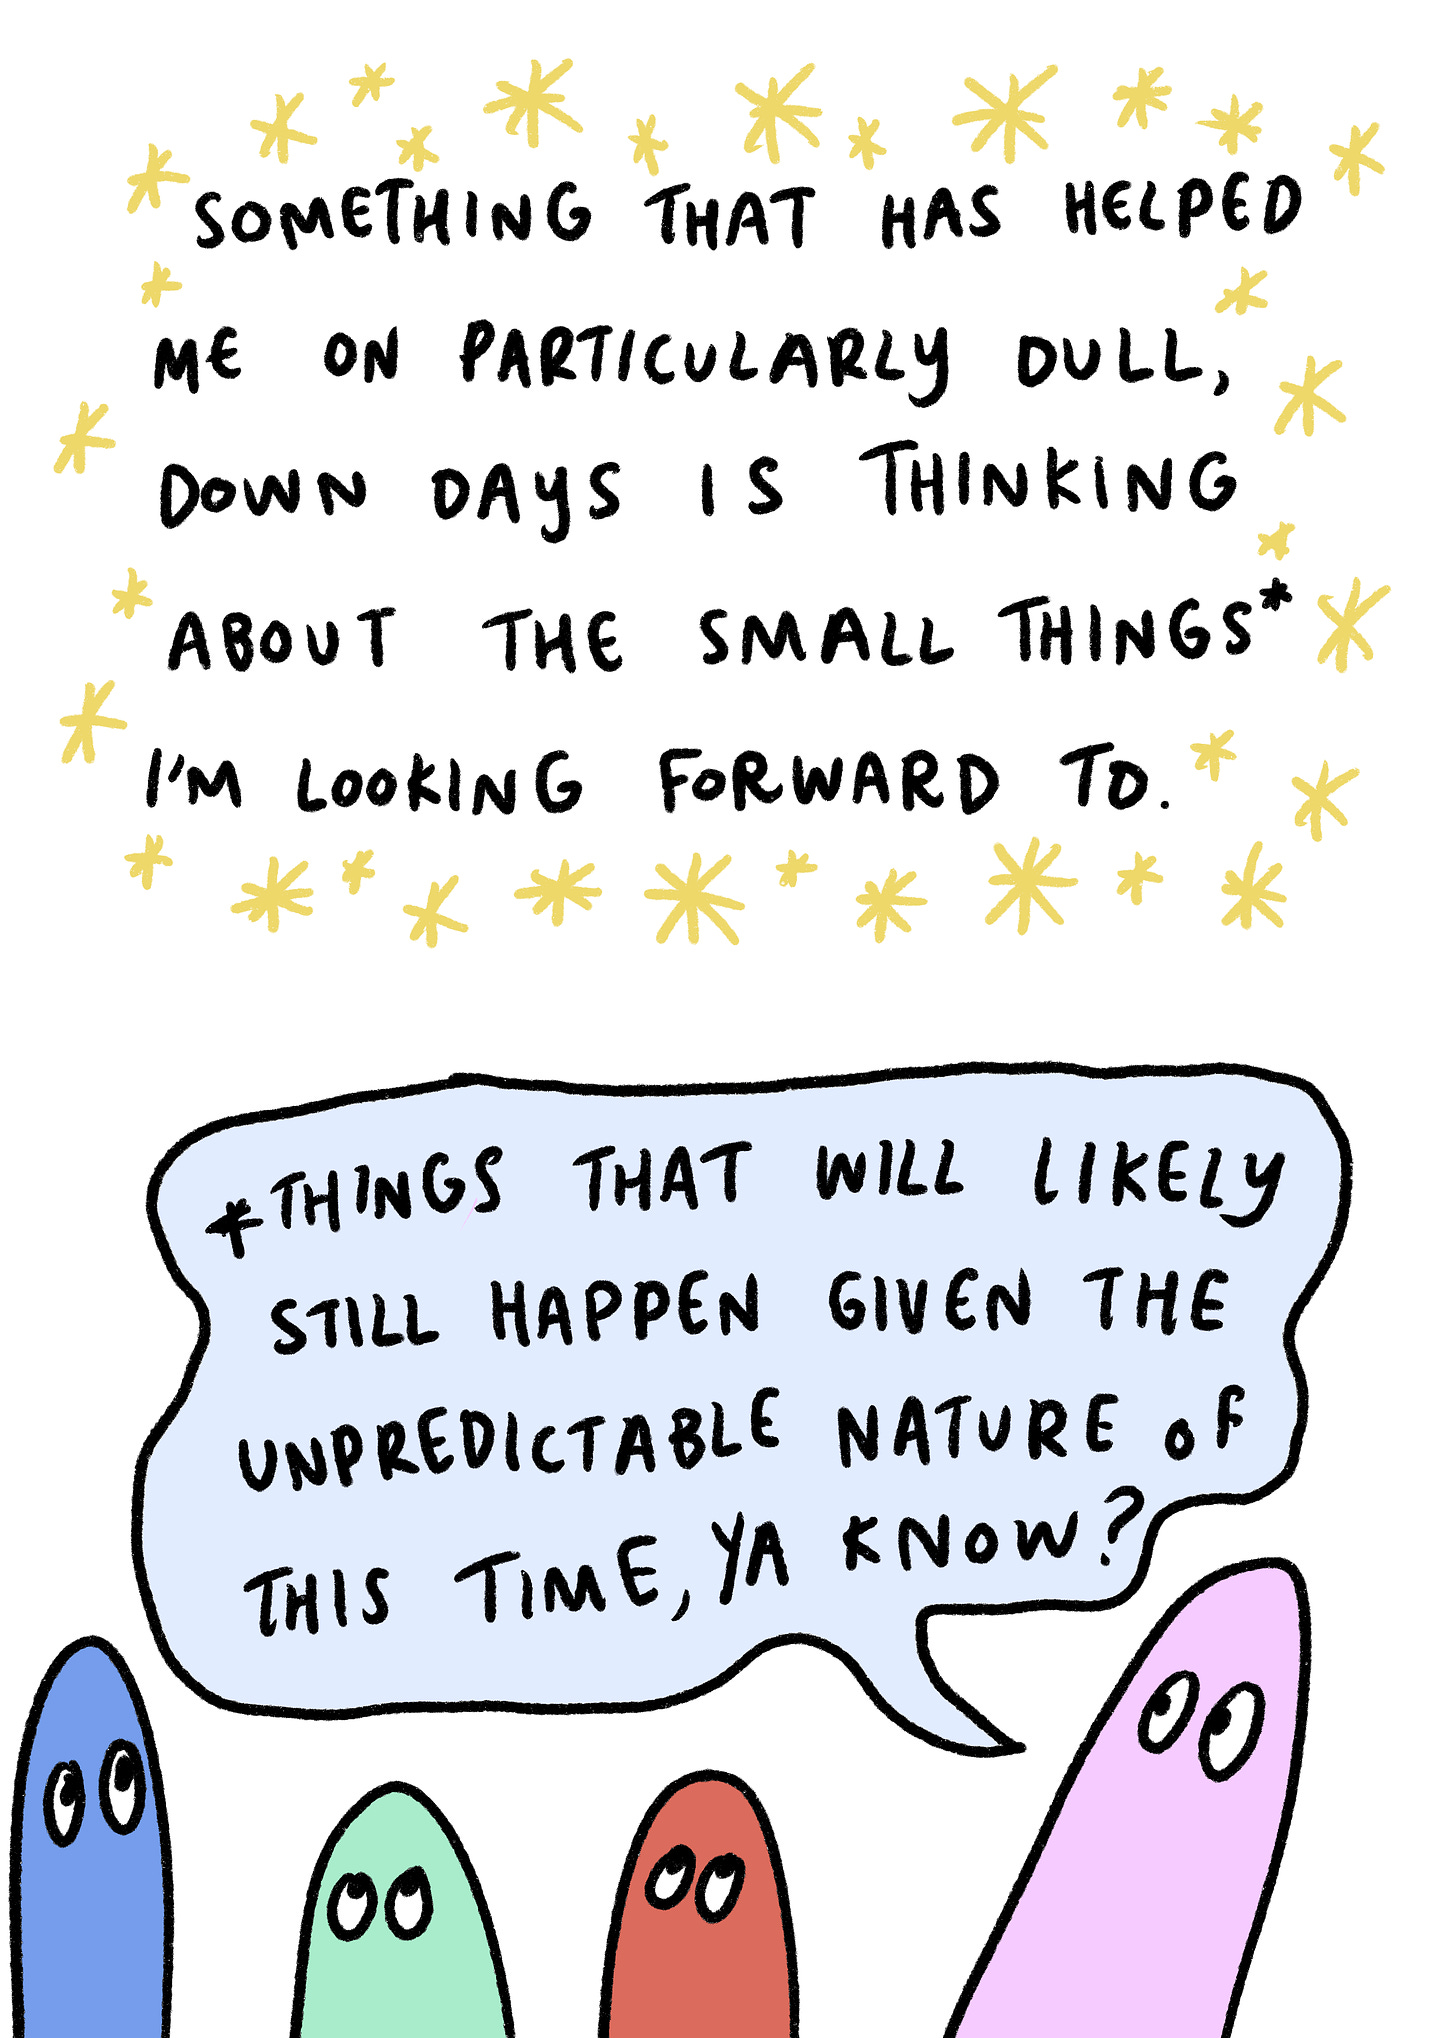 The text reads: "Something that has helped me on particularly dull, down days is thinking about the small things I'm looking forward to — things that will likely still happen given the unpredictable nature of this time, ya know?"